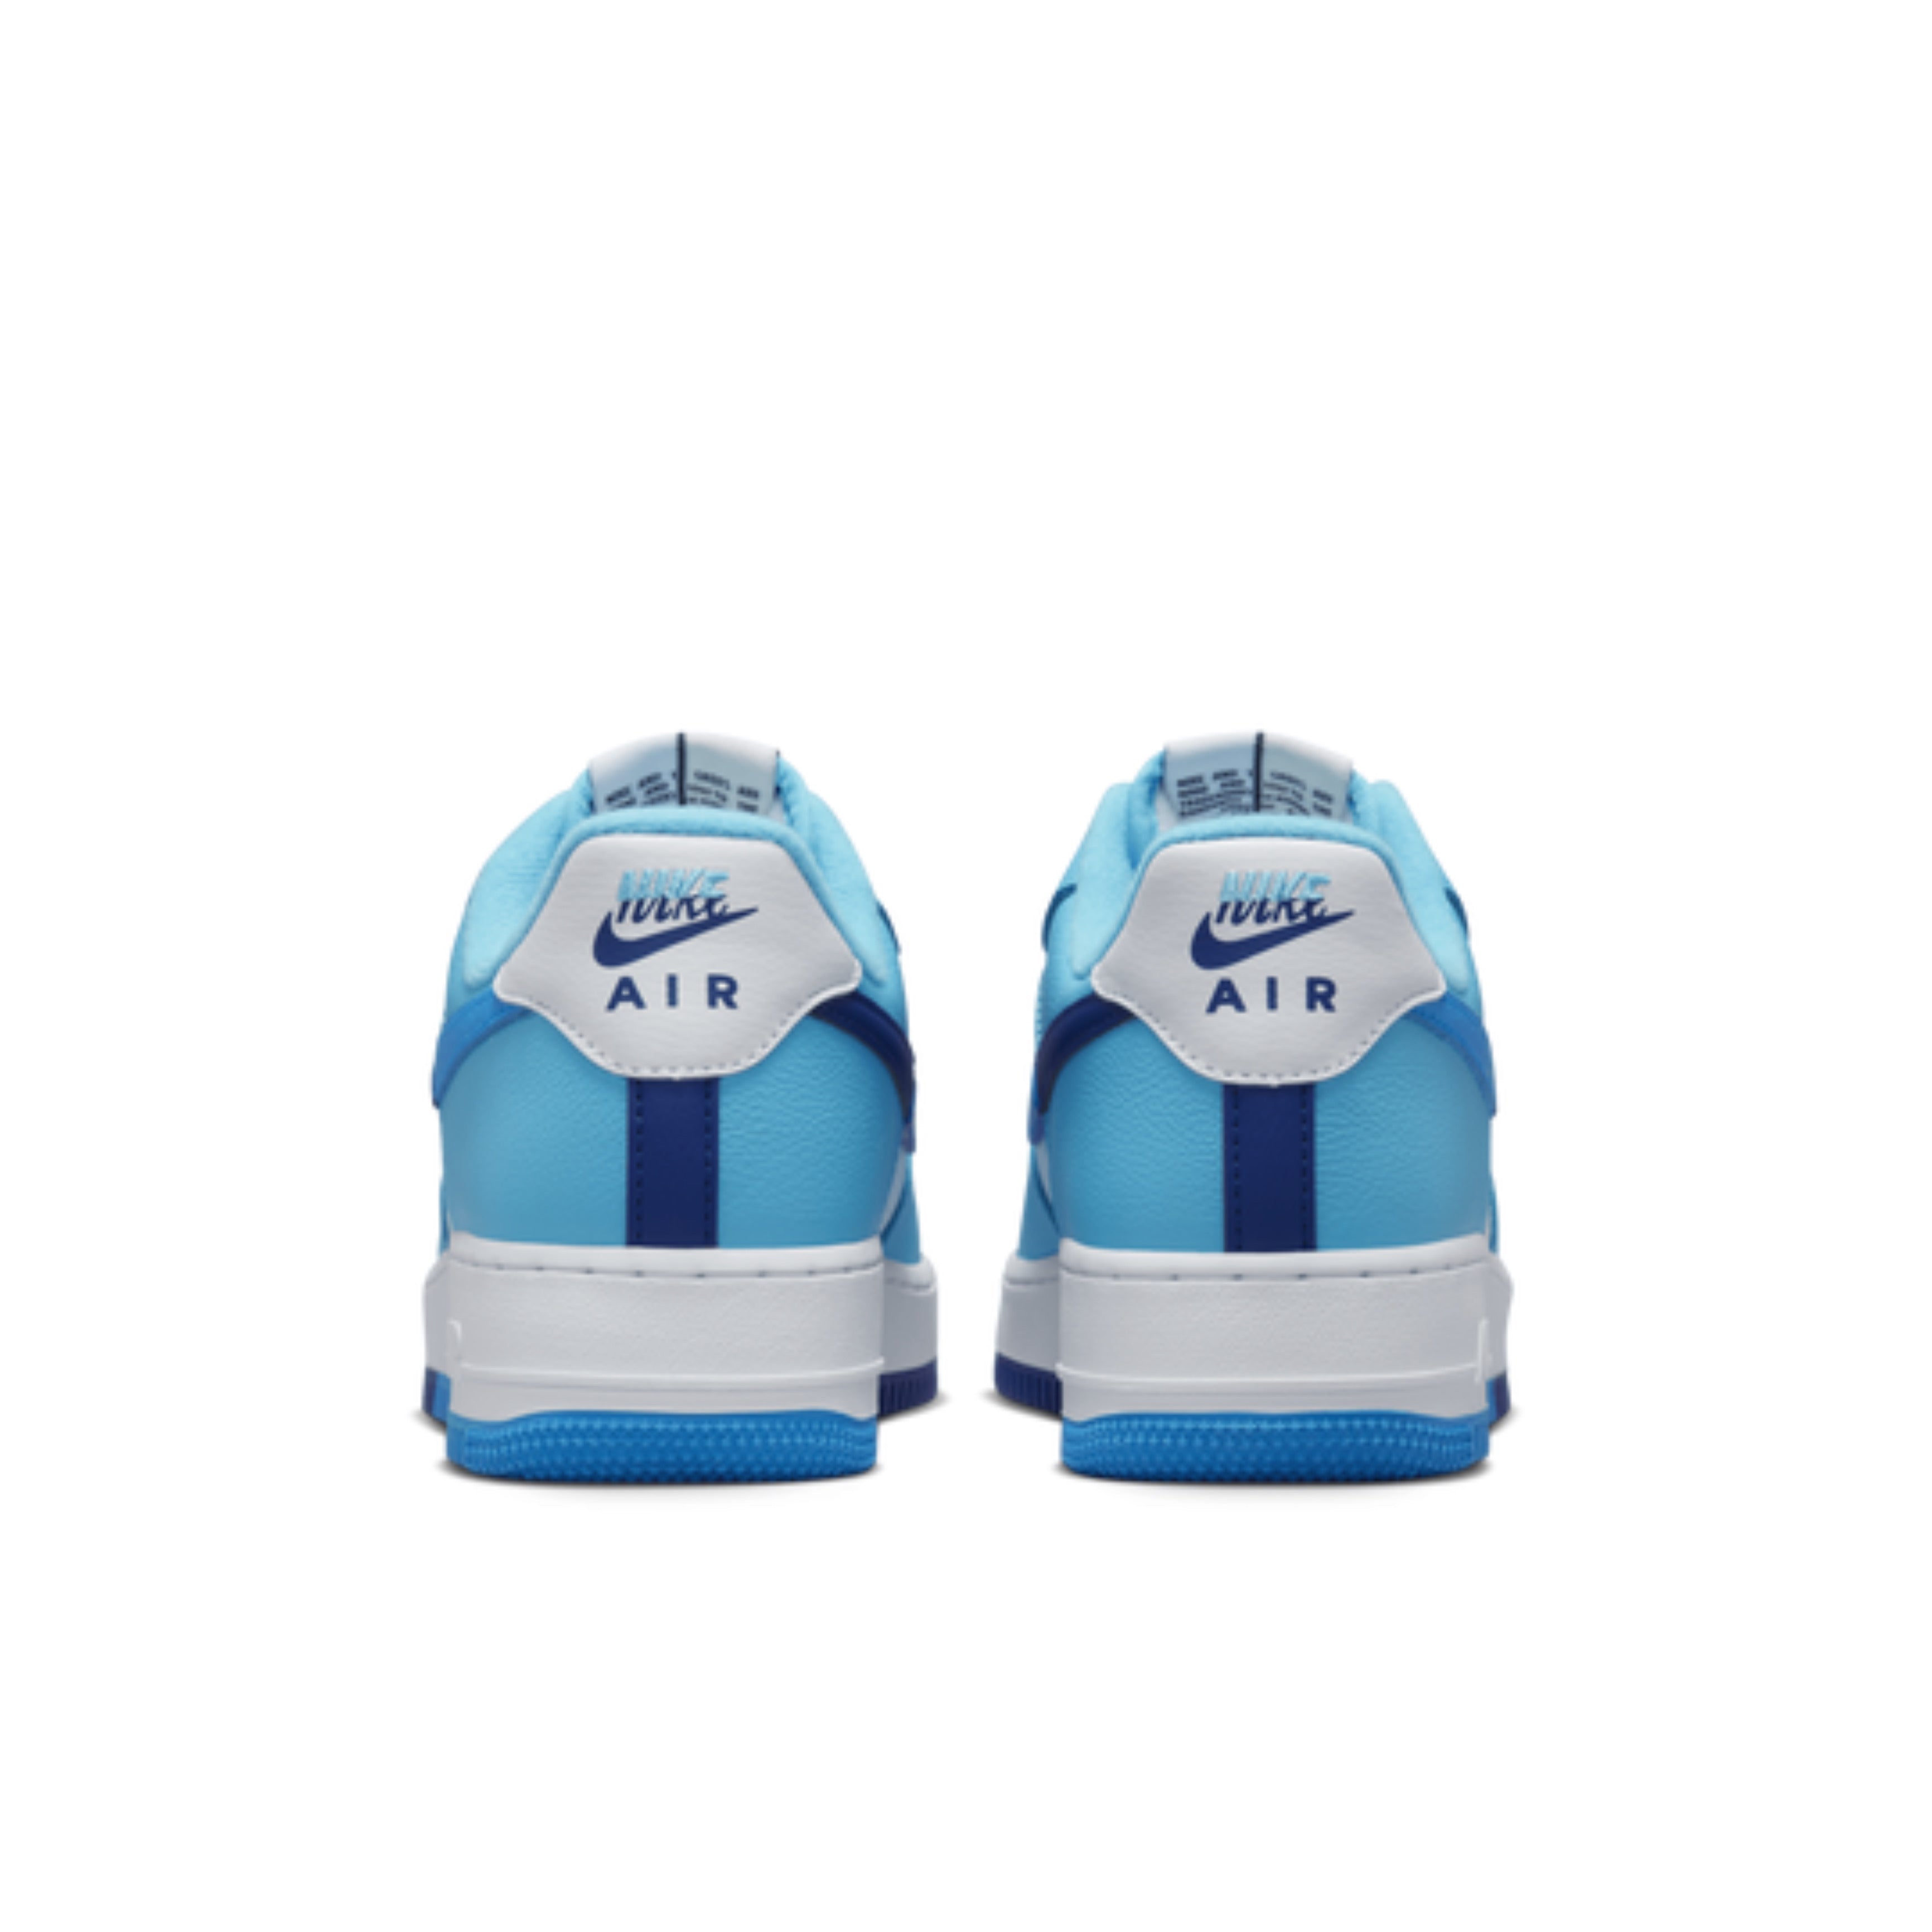 Nike airforce A1 double blue shoes